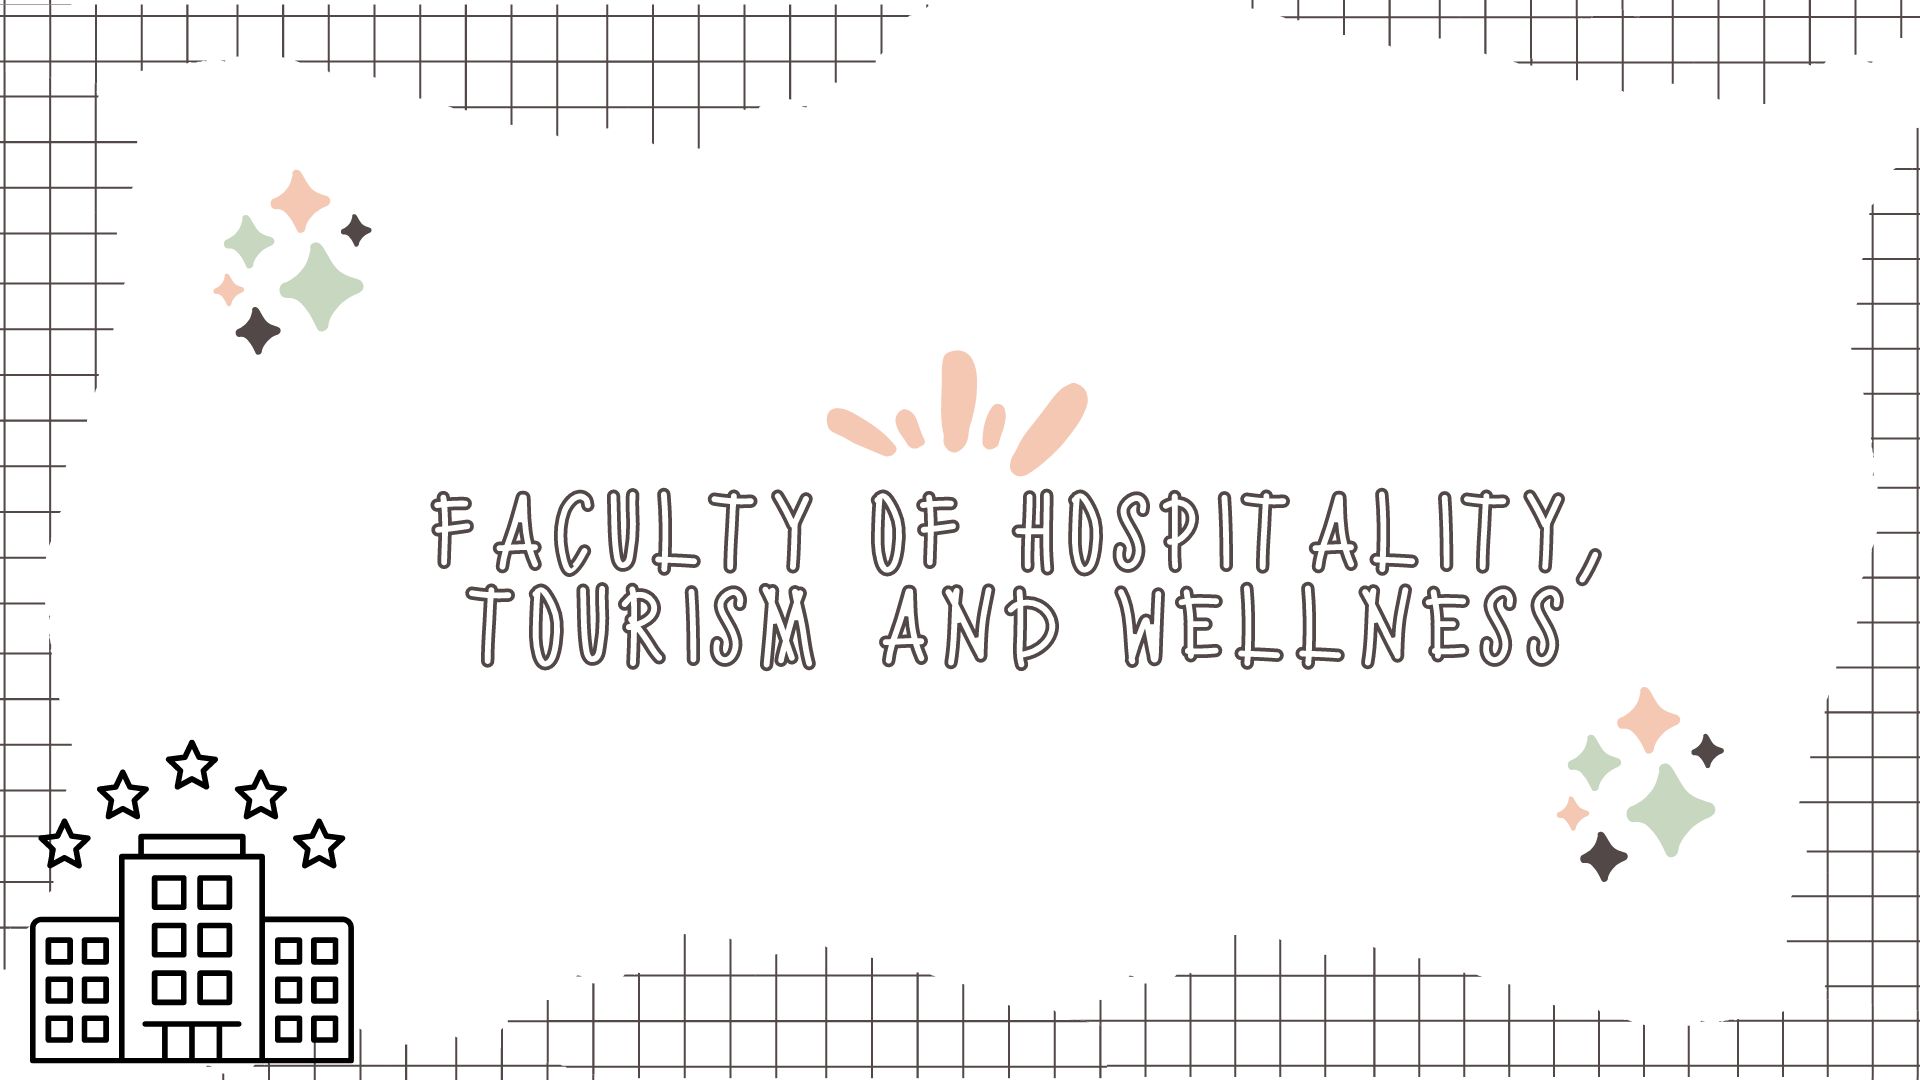 FACULTY OF HOSPITALITY, TOURISM AND WELLNESS